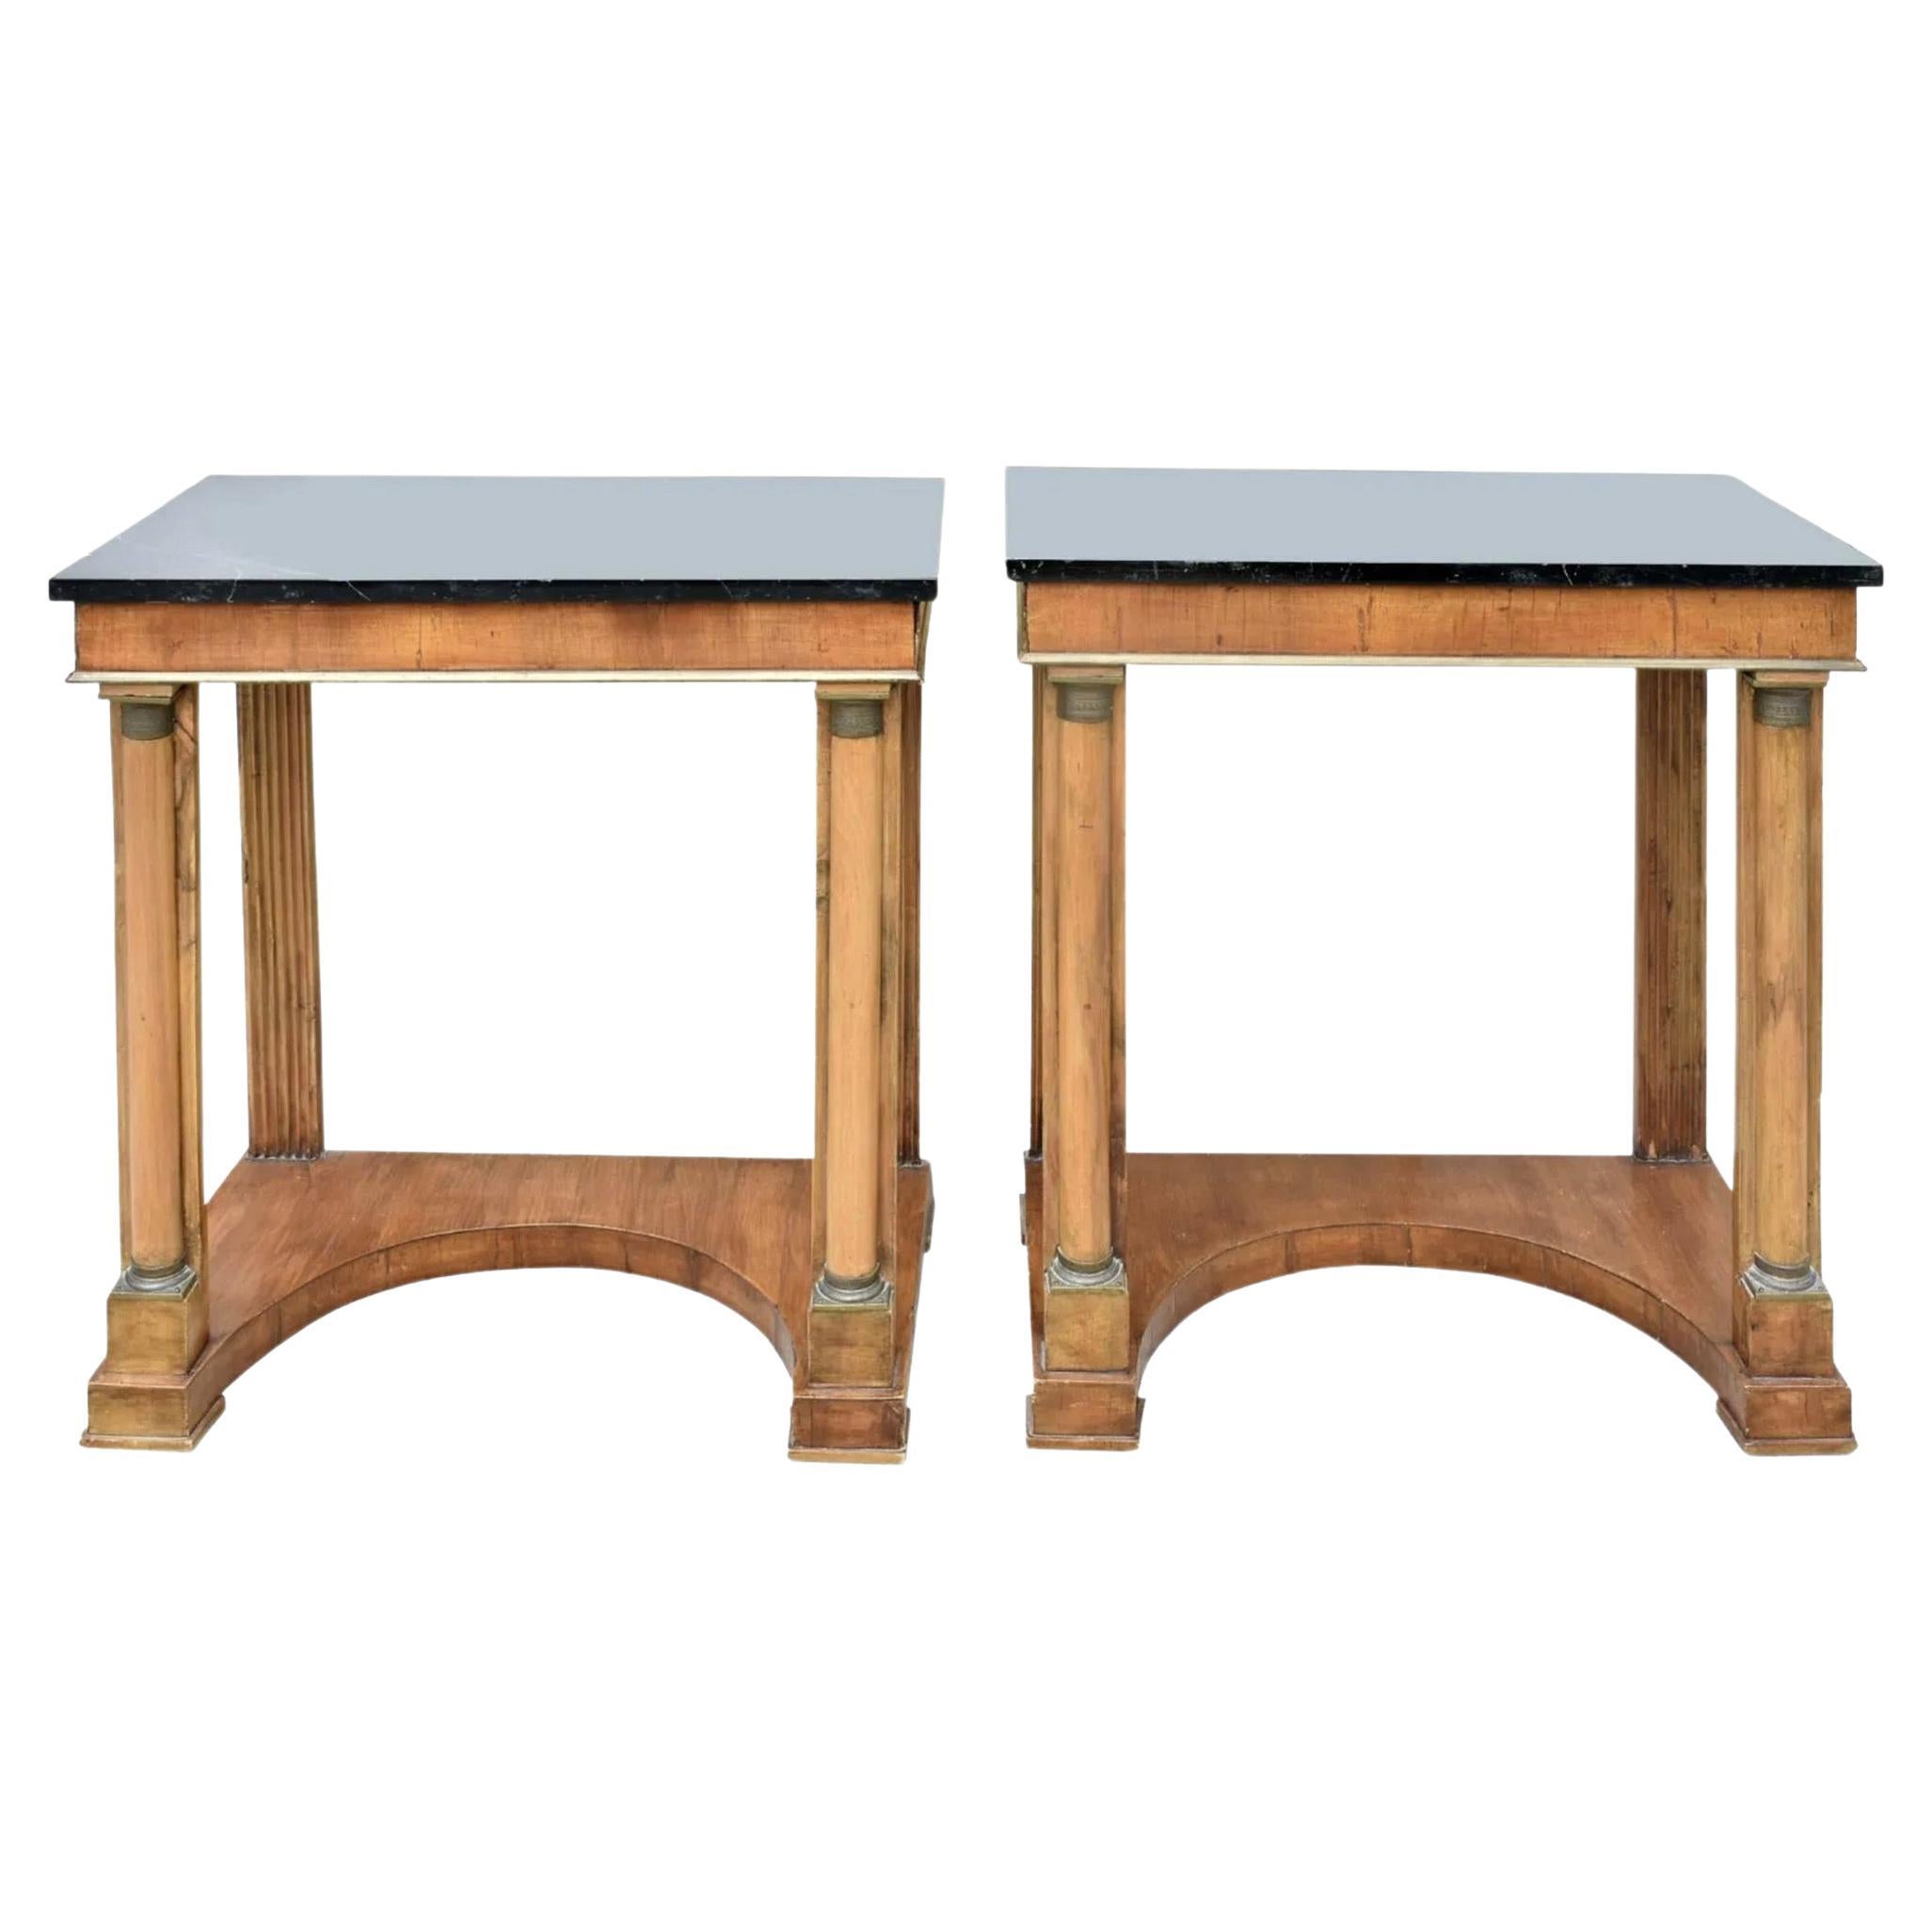 Pair of Mid 19th Century Antique French Empire Tables